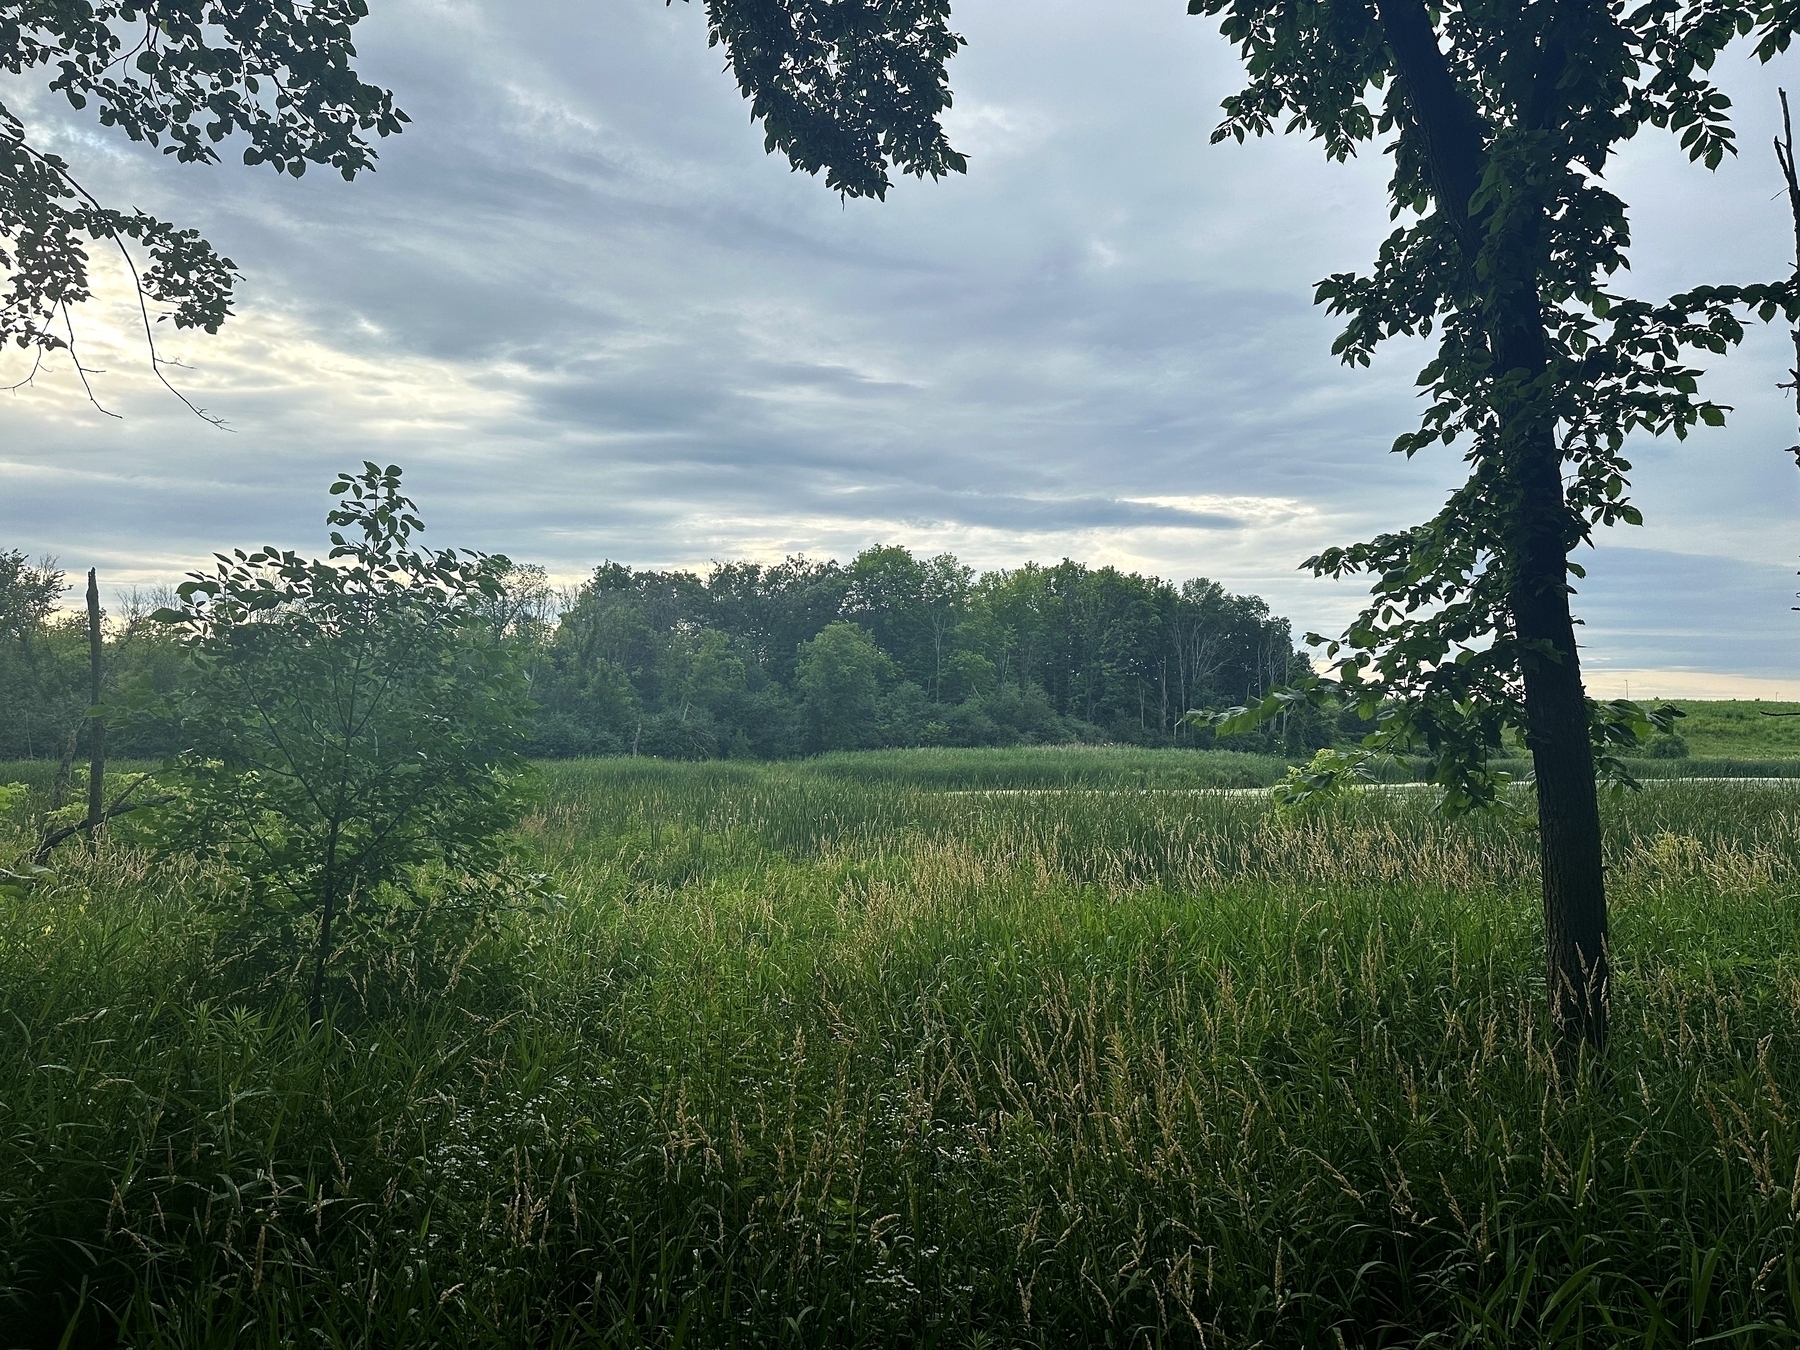 Dense green grasses and foliage standing still amid a meadow bordered by a forest under a cloudy sky. Trees frame the scene while the horizon shows a distant line of trees.